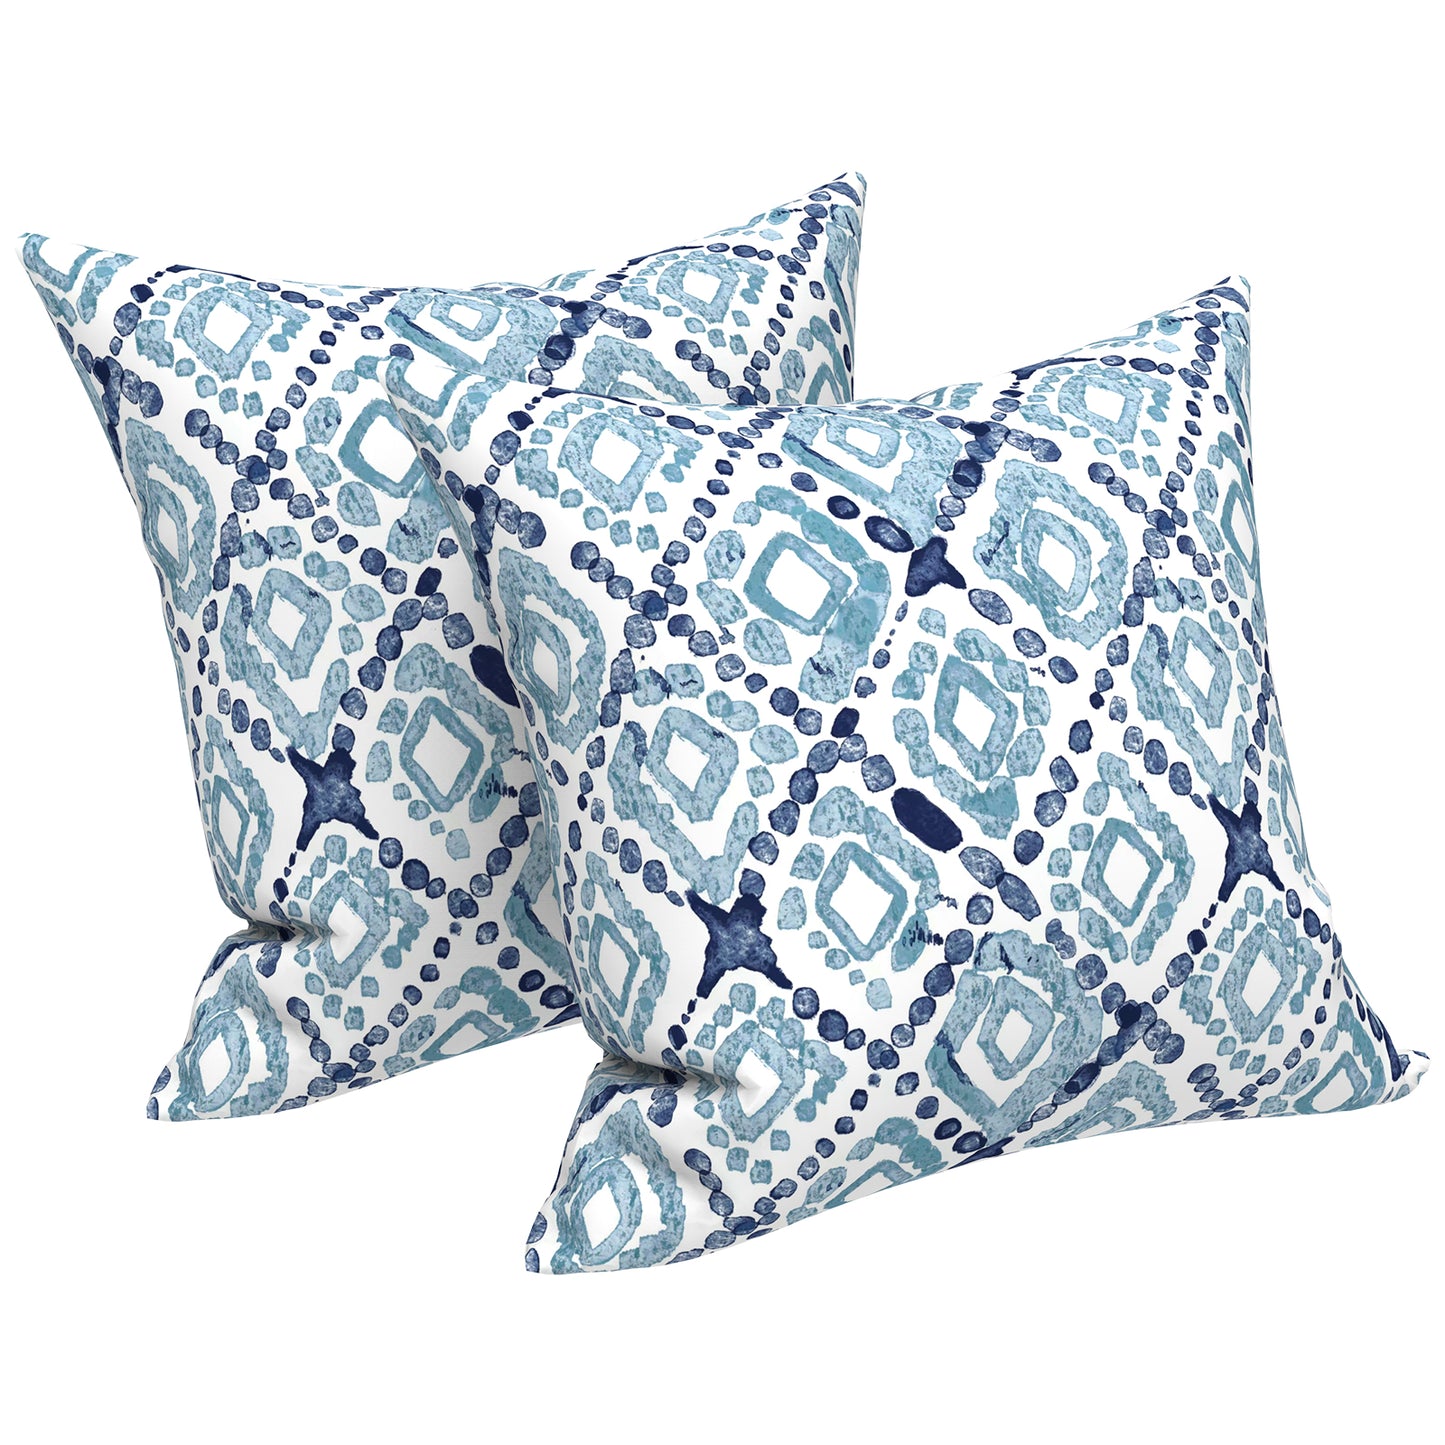 Melody Elephant Outdoor Throw Pillow Covers Pack of 2, Decorative Water Repellent Square Pillow Cases 18x18 Inch, Patio Pillowcases for Home Patio Furniture Use, Boho Geometry Blue